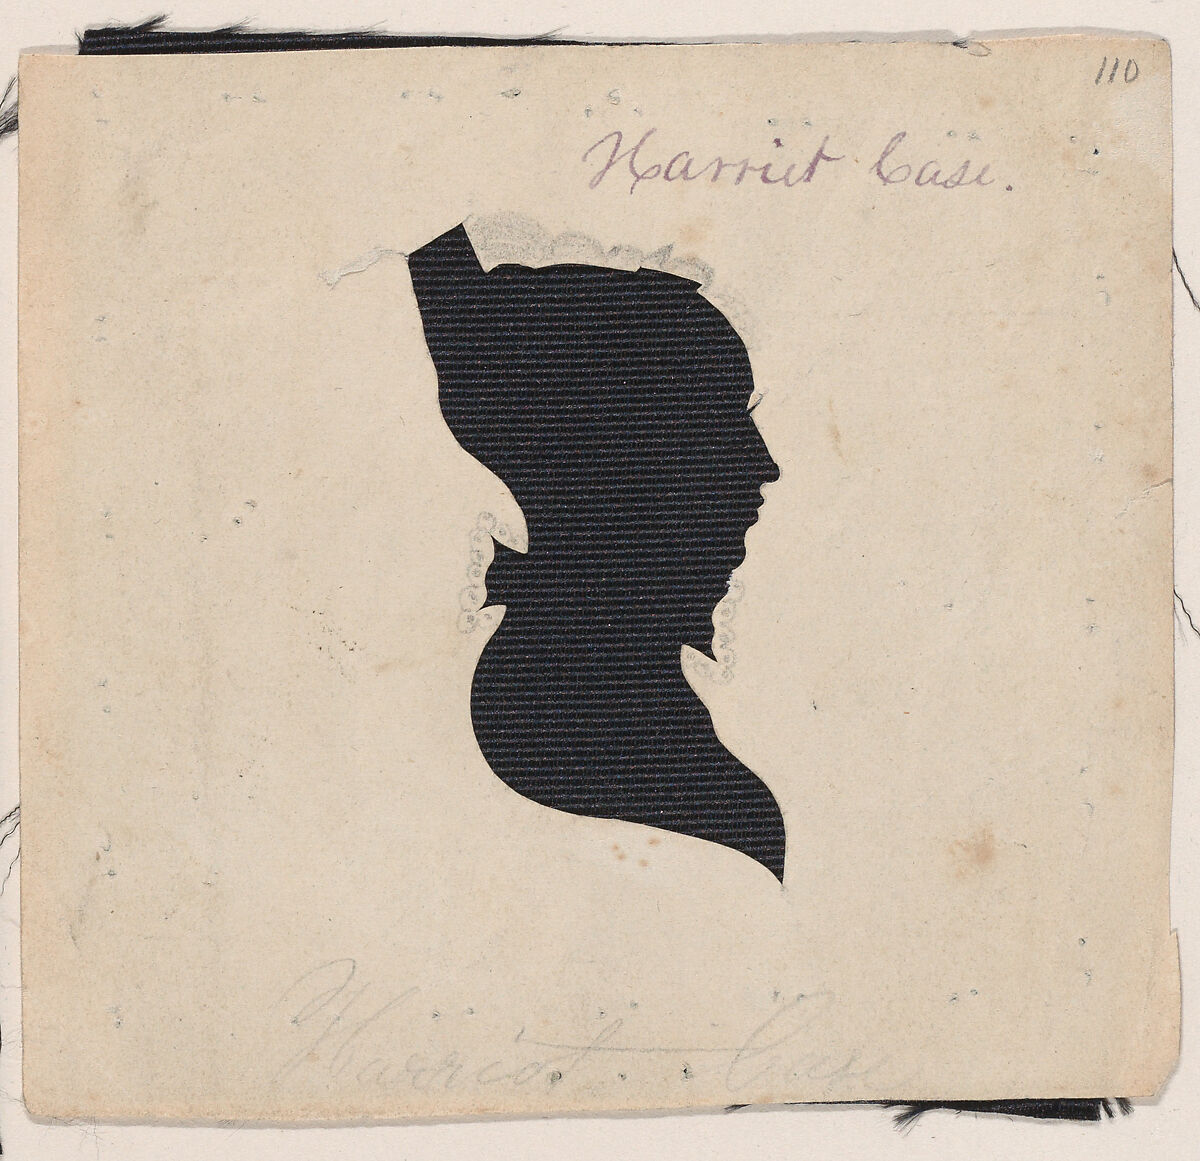 Silhouette of Harriet Case, to right, Probably by William Chamberlain (American, born Loudon, New Hampshire, 1790), Hollow cut paper 